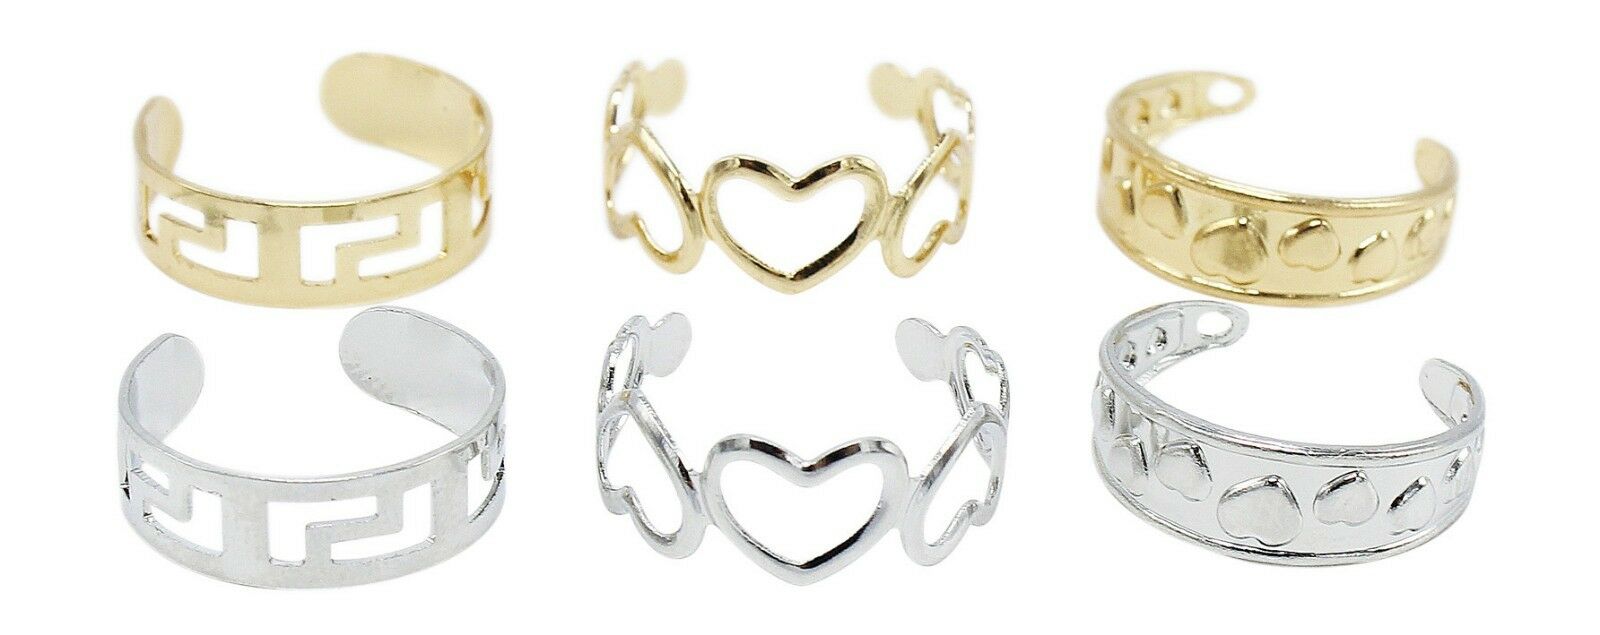 New Gold Or Silver 3 Piece Plated Toe Ring Sets #r1176